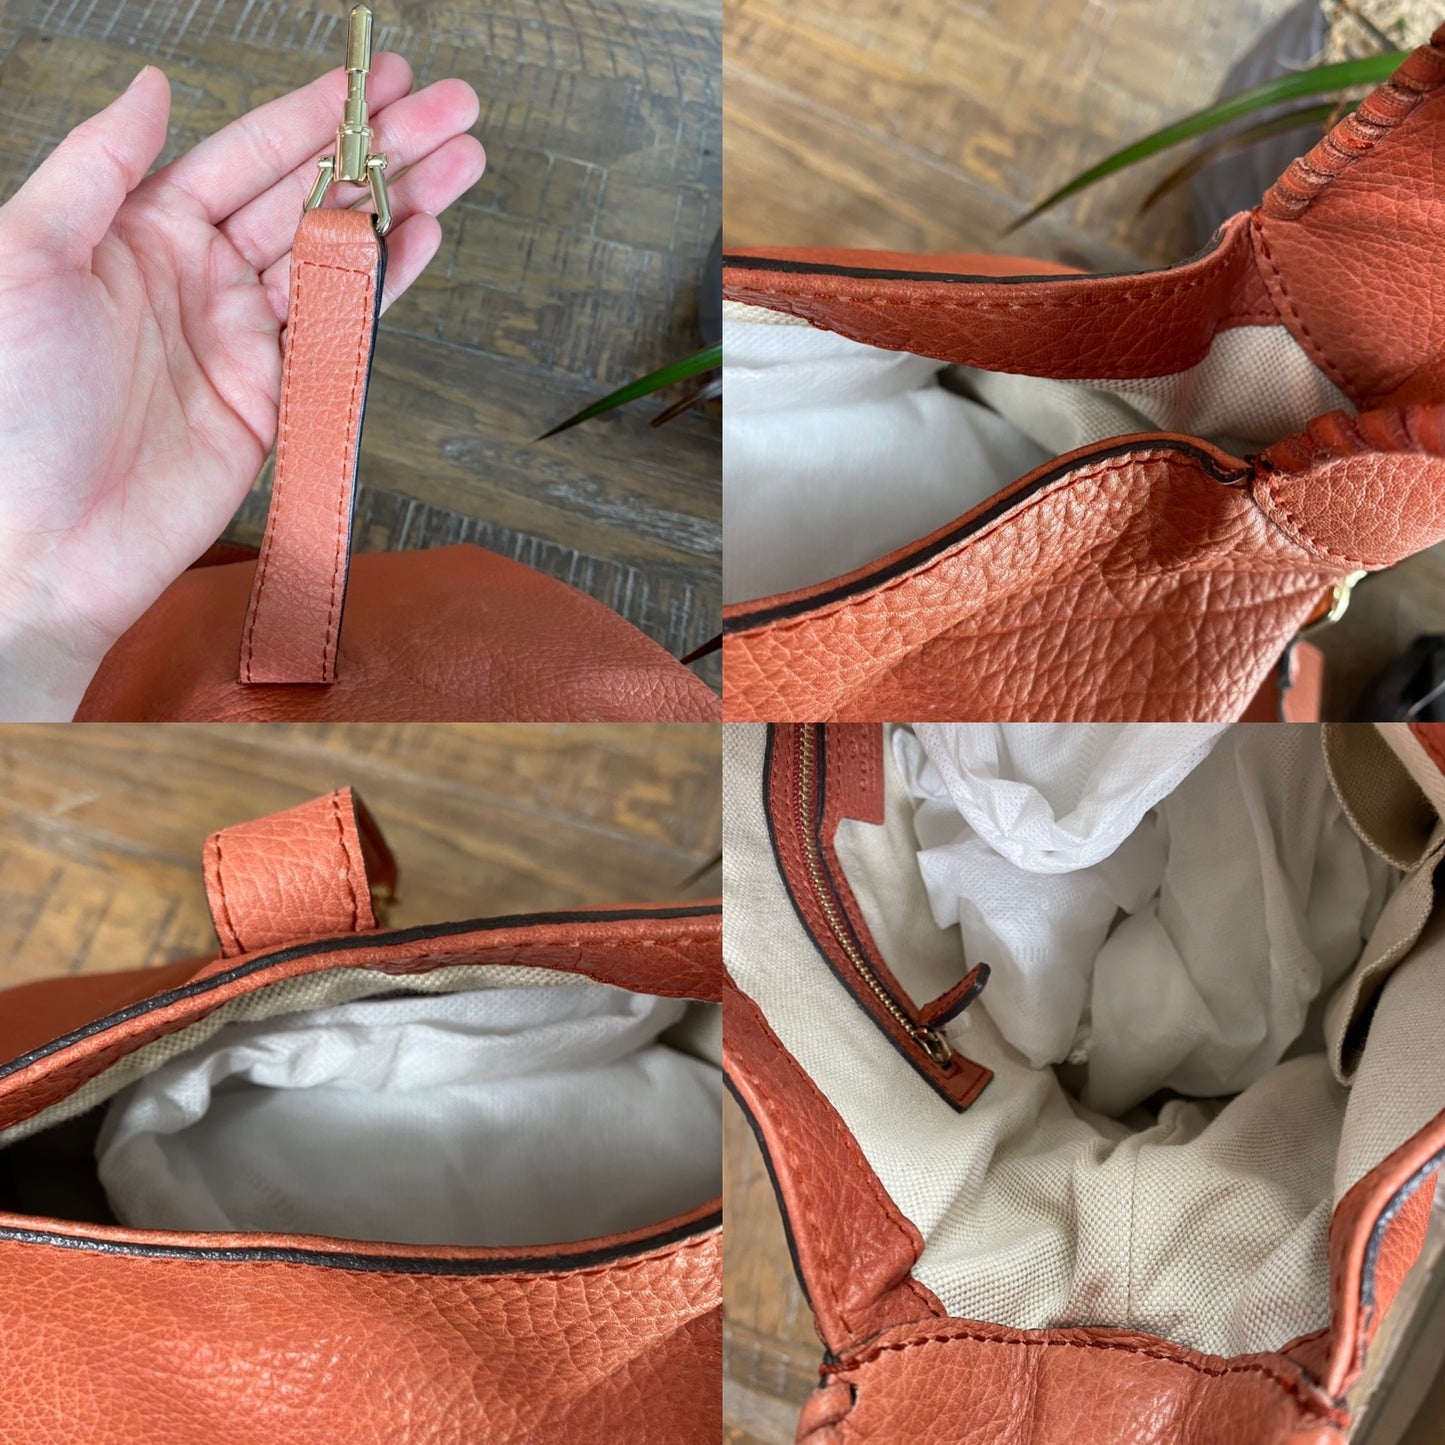 Gucci New Jackie Bamboo Whipstitch Hobo Bag